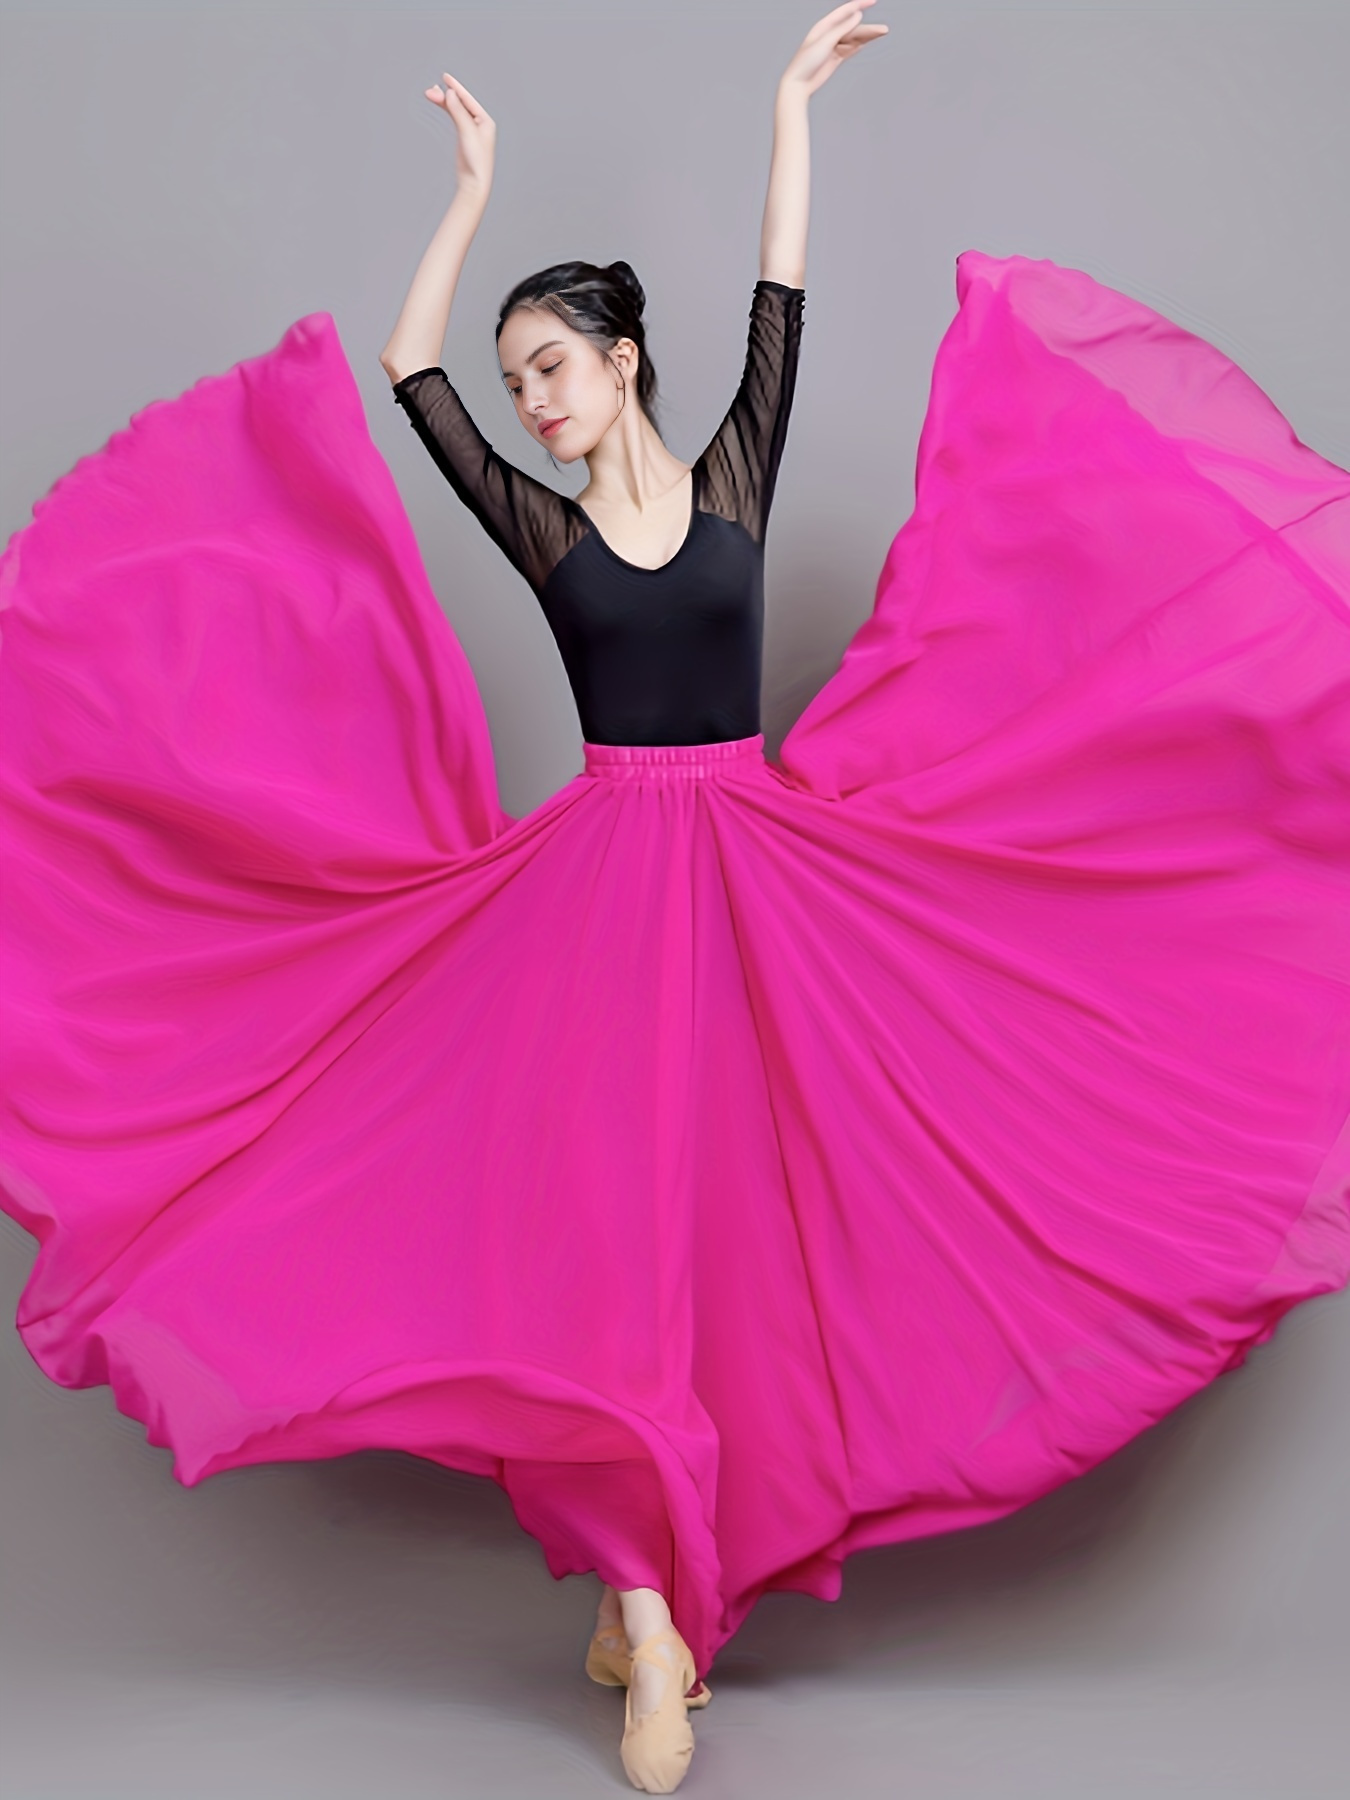 TW Dance - High Quality Dance Dresses, Haberdashery & Trimmings